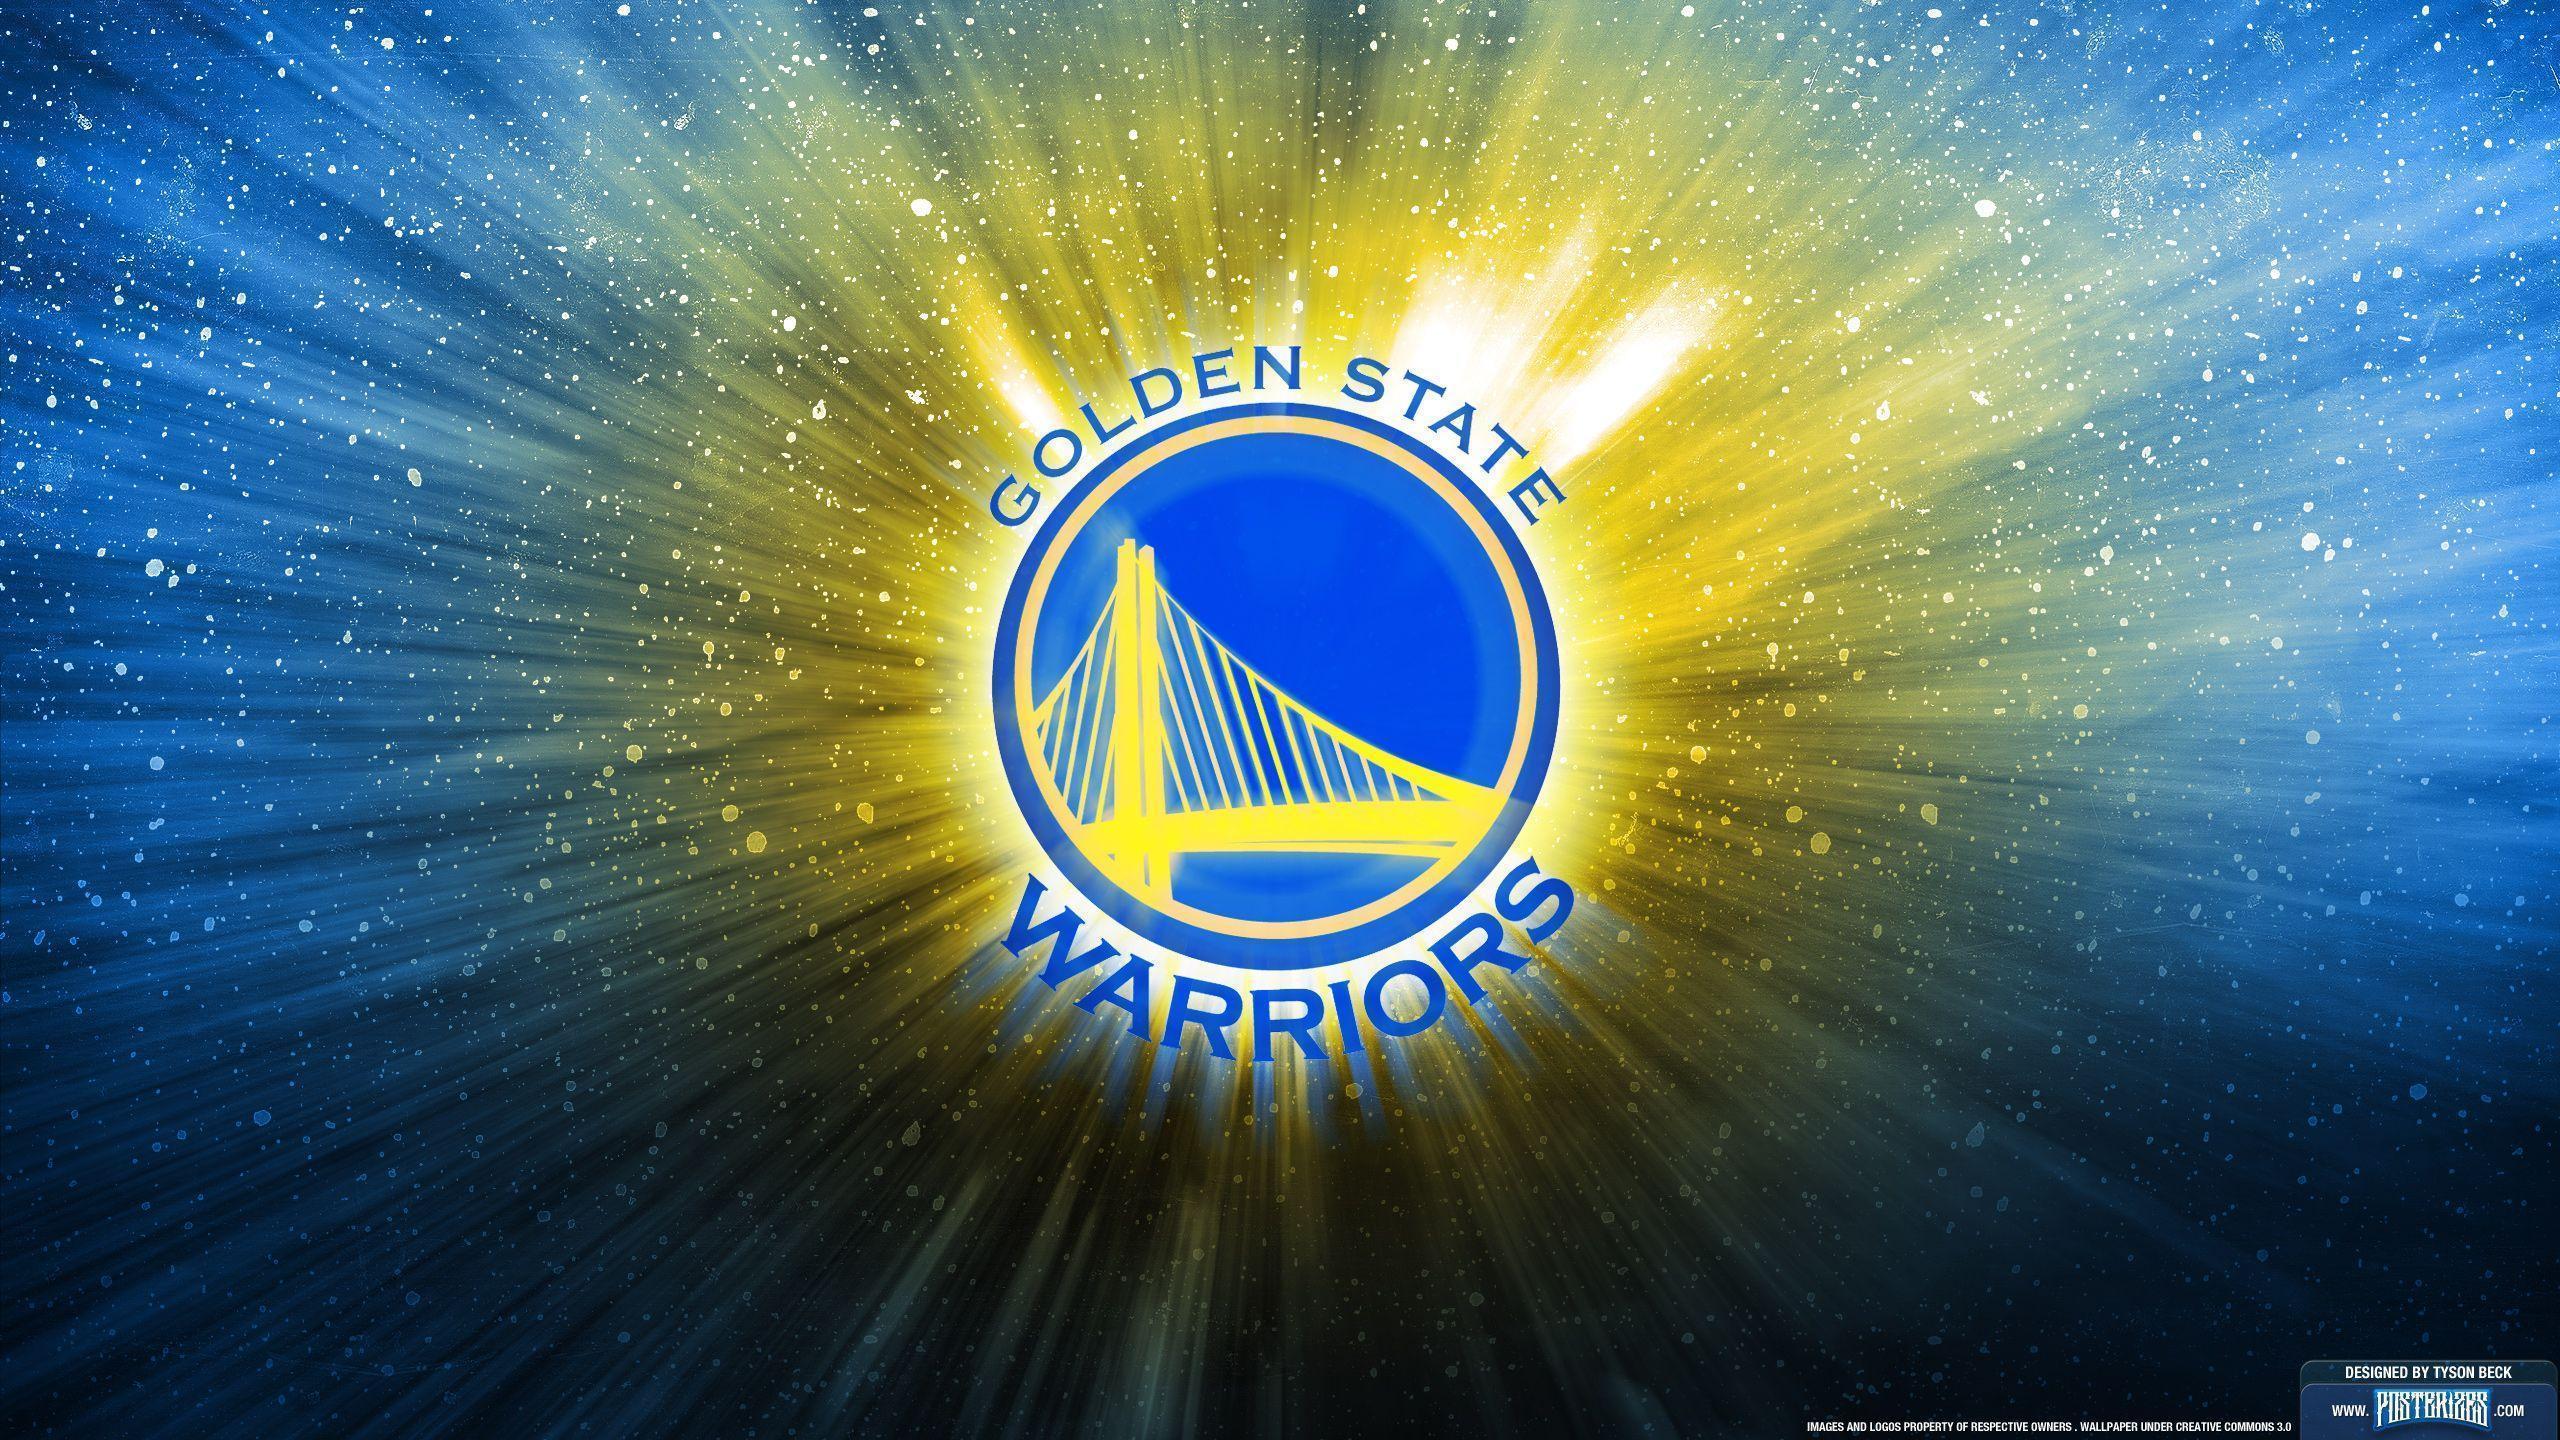 Golden State Warriors Strength in Numbers